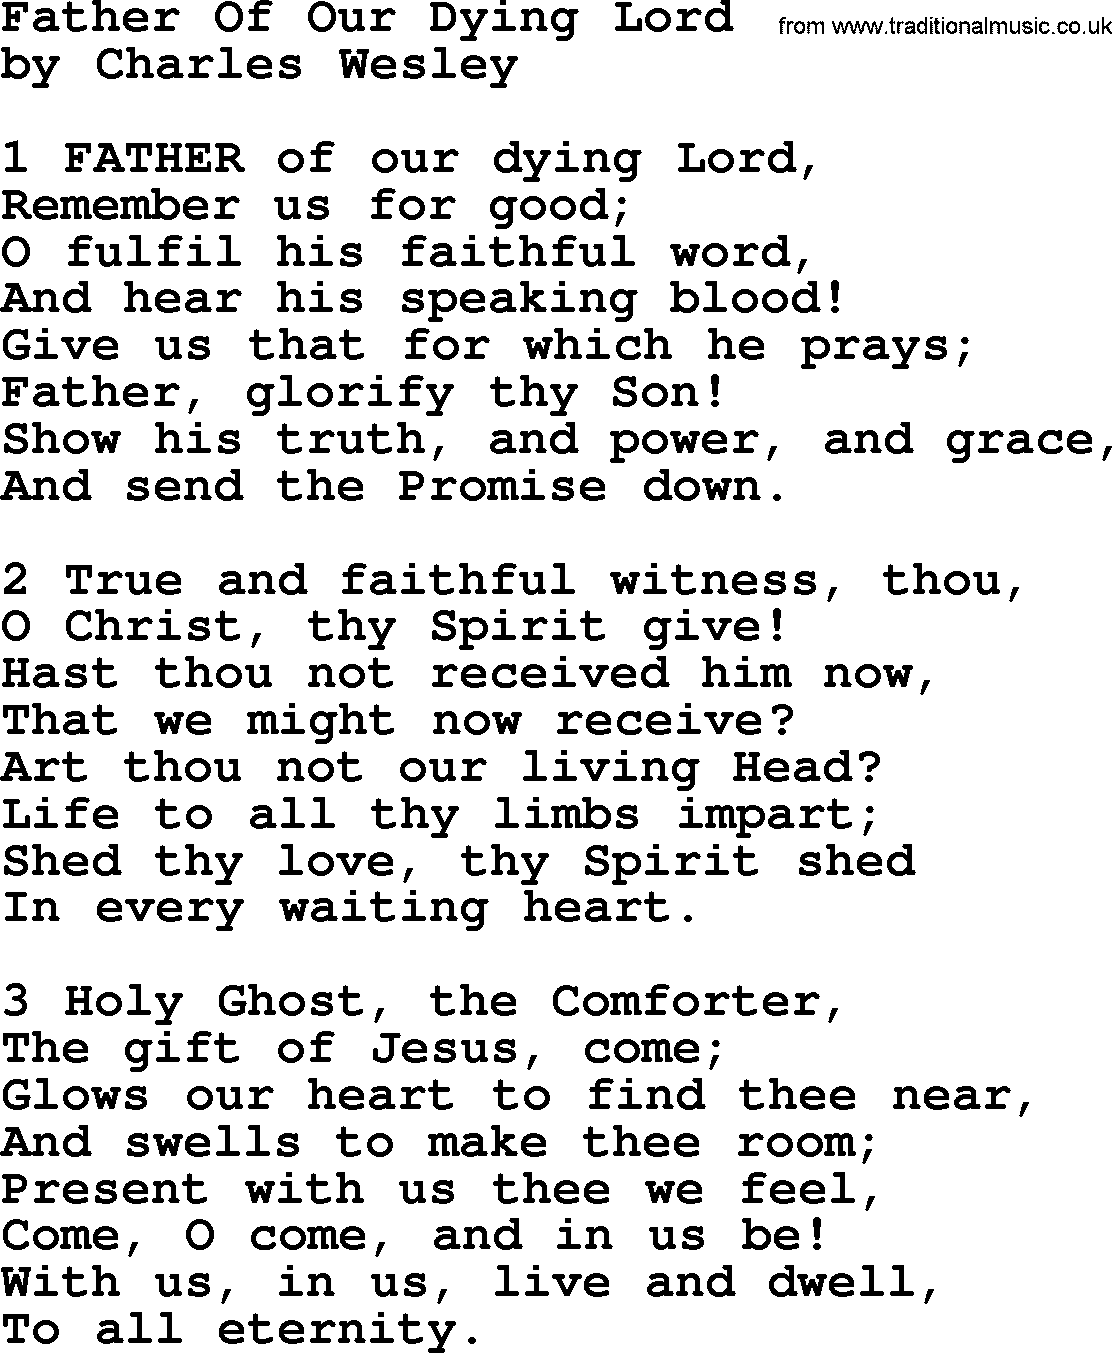 Charles Wesley hymn: Father Of Our Dying Lord, lyrics